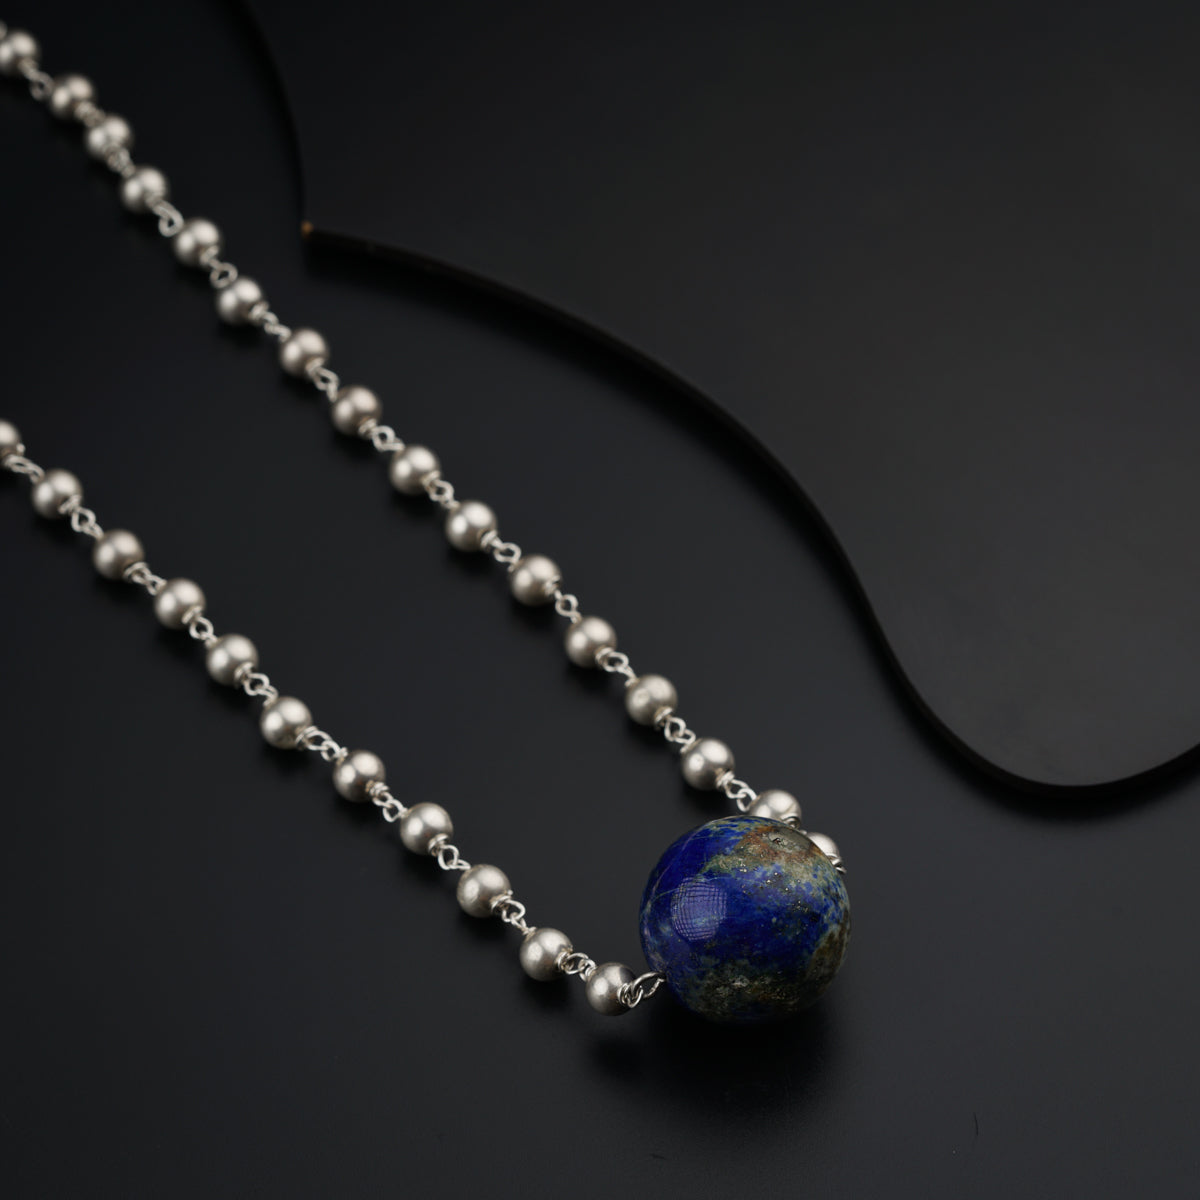 Silver Beads Necklace with Lapis